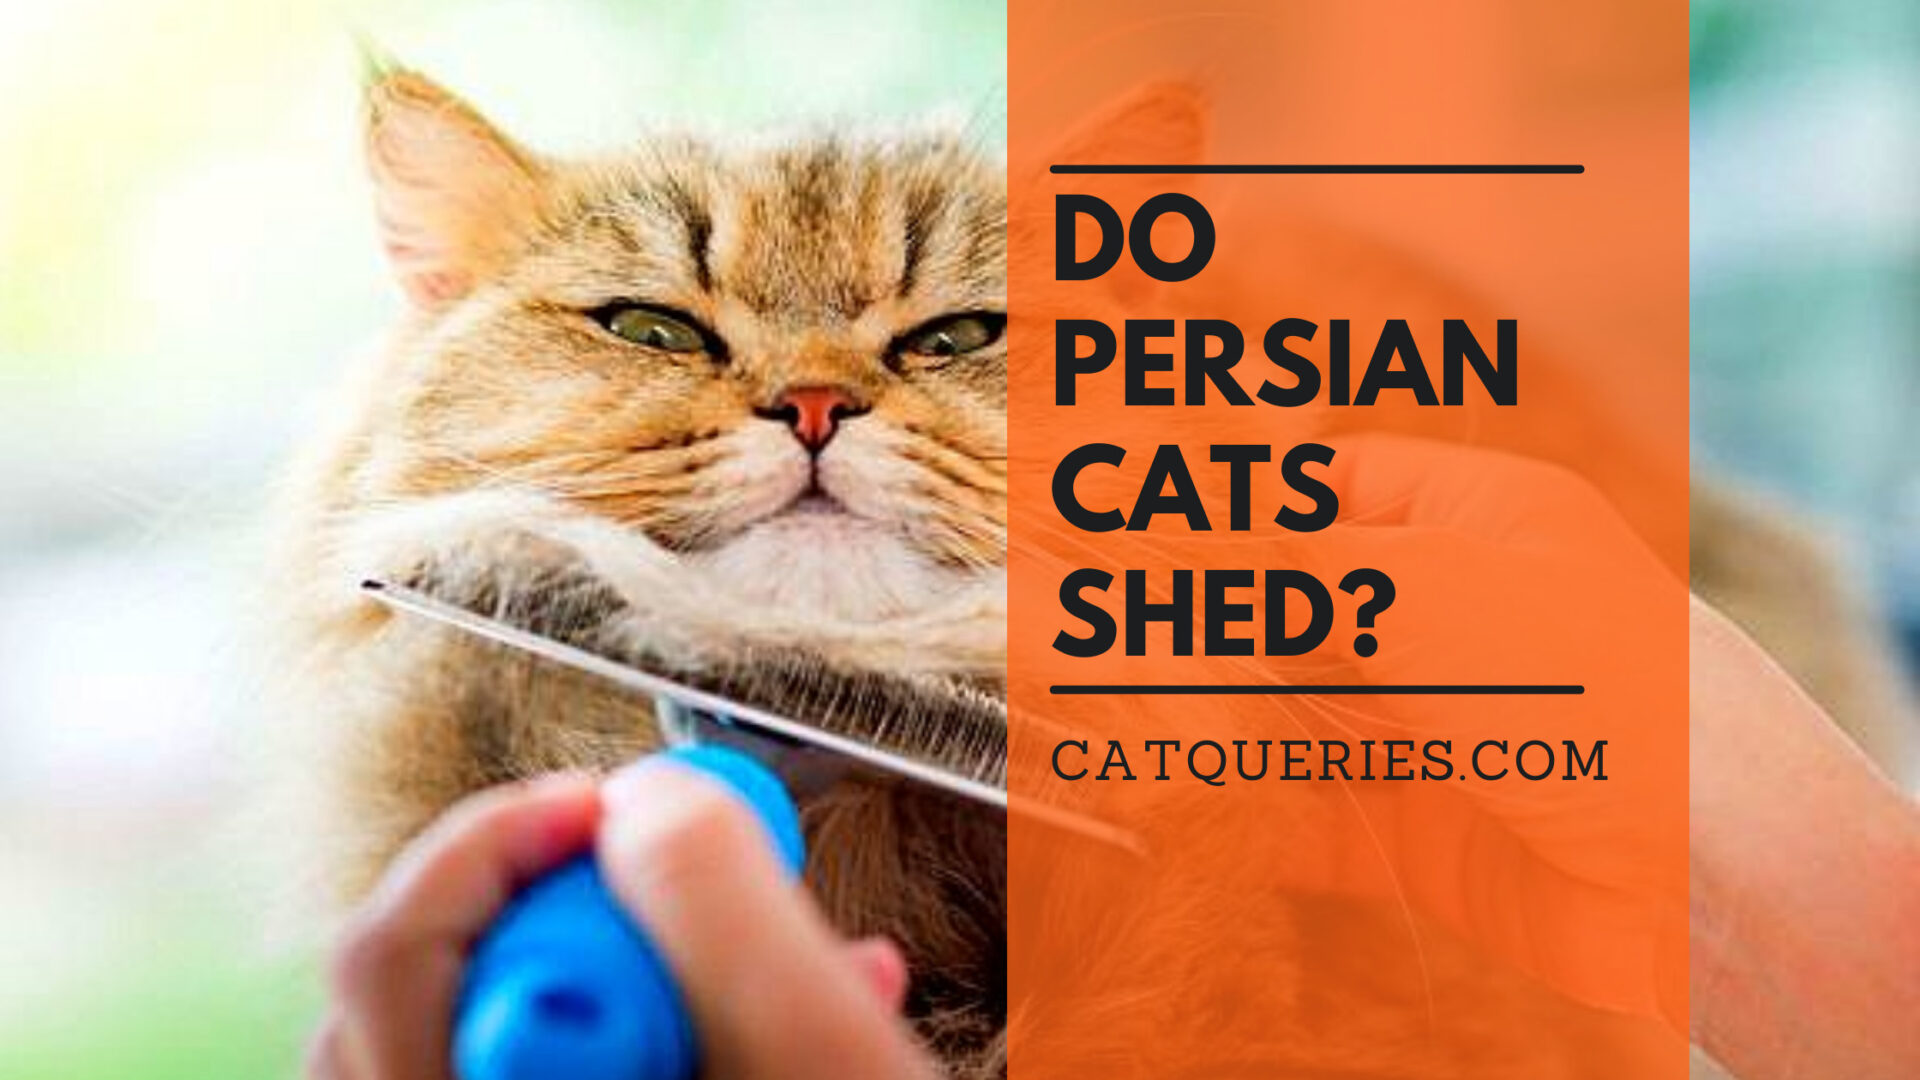 Do Persian cats shed?